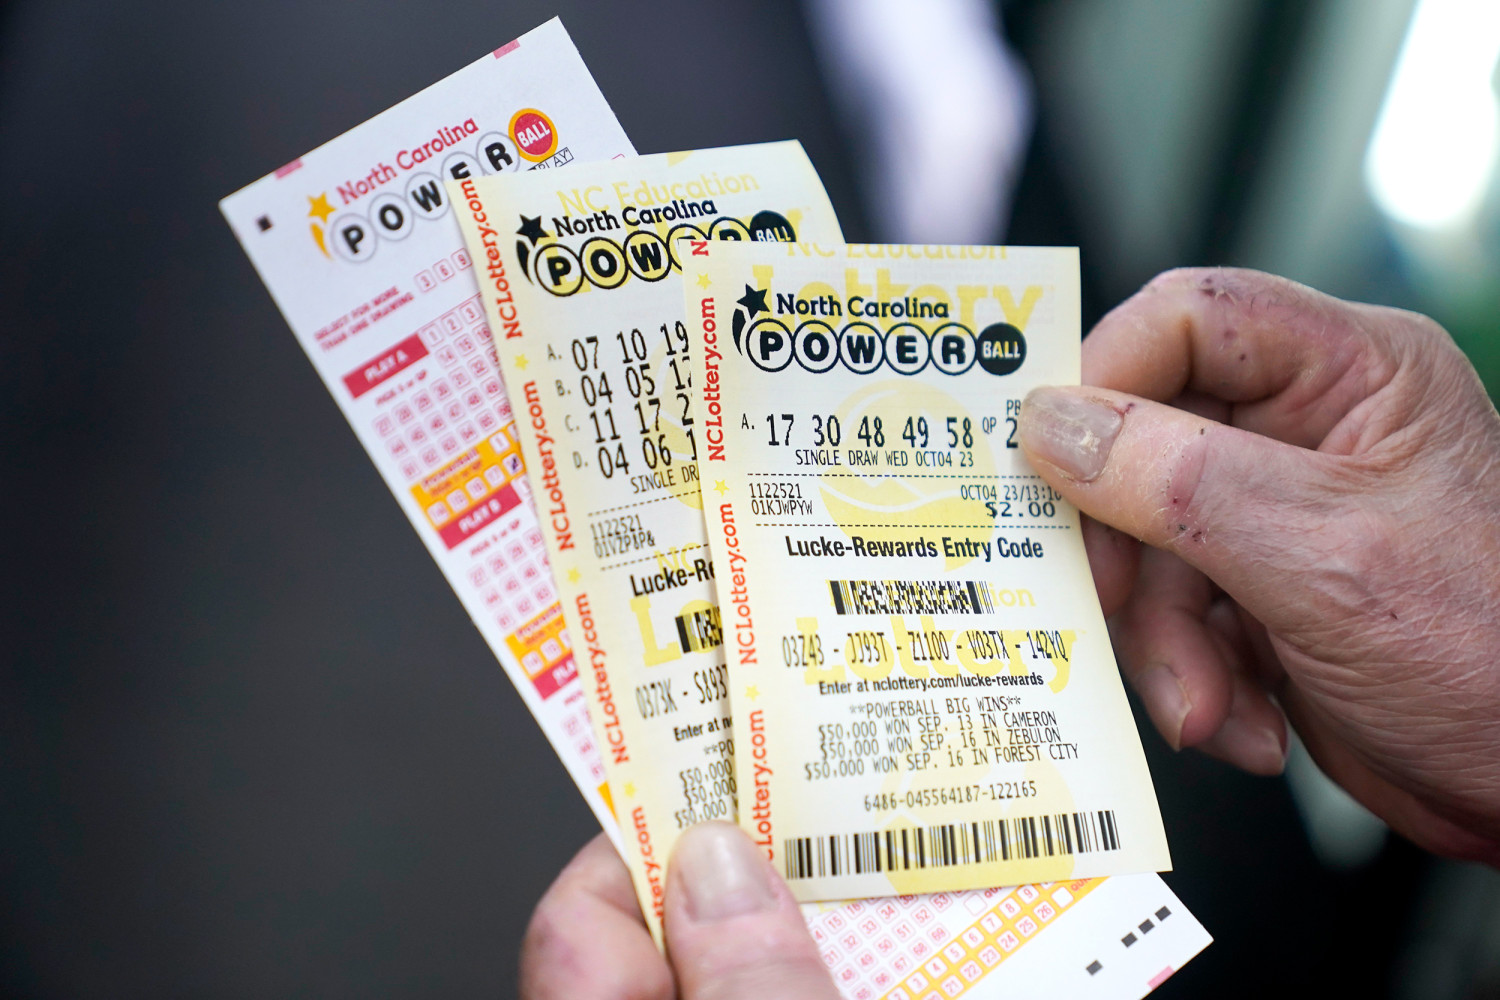 Powerball odds, how to play explained as jackpot climbs to $1.4